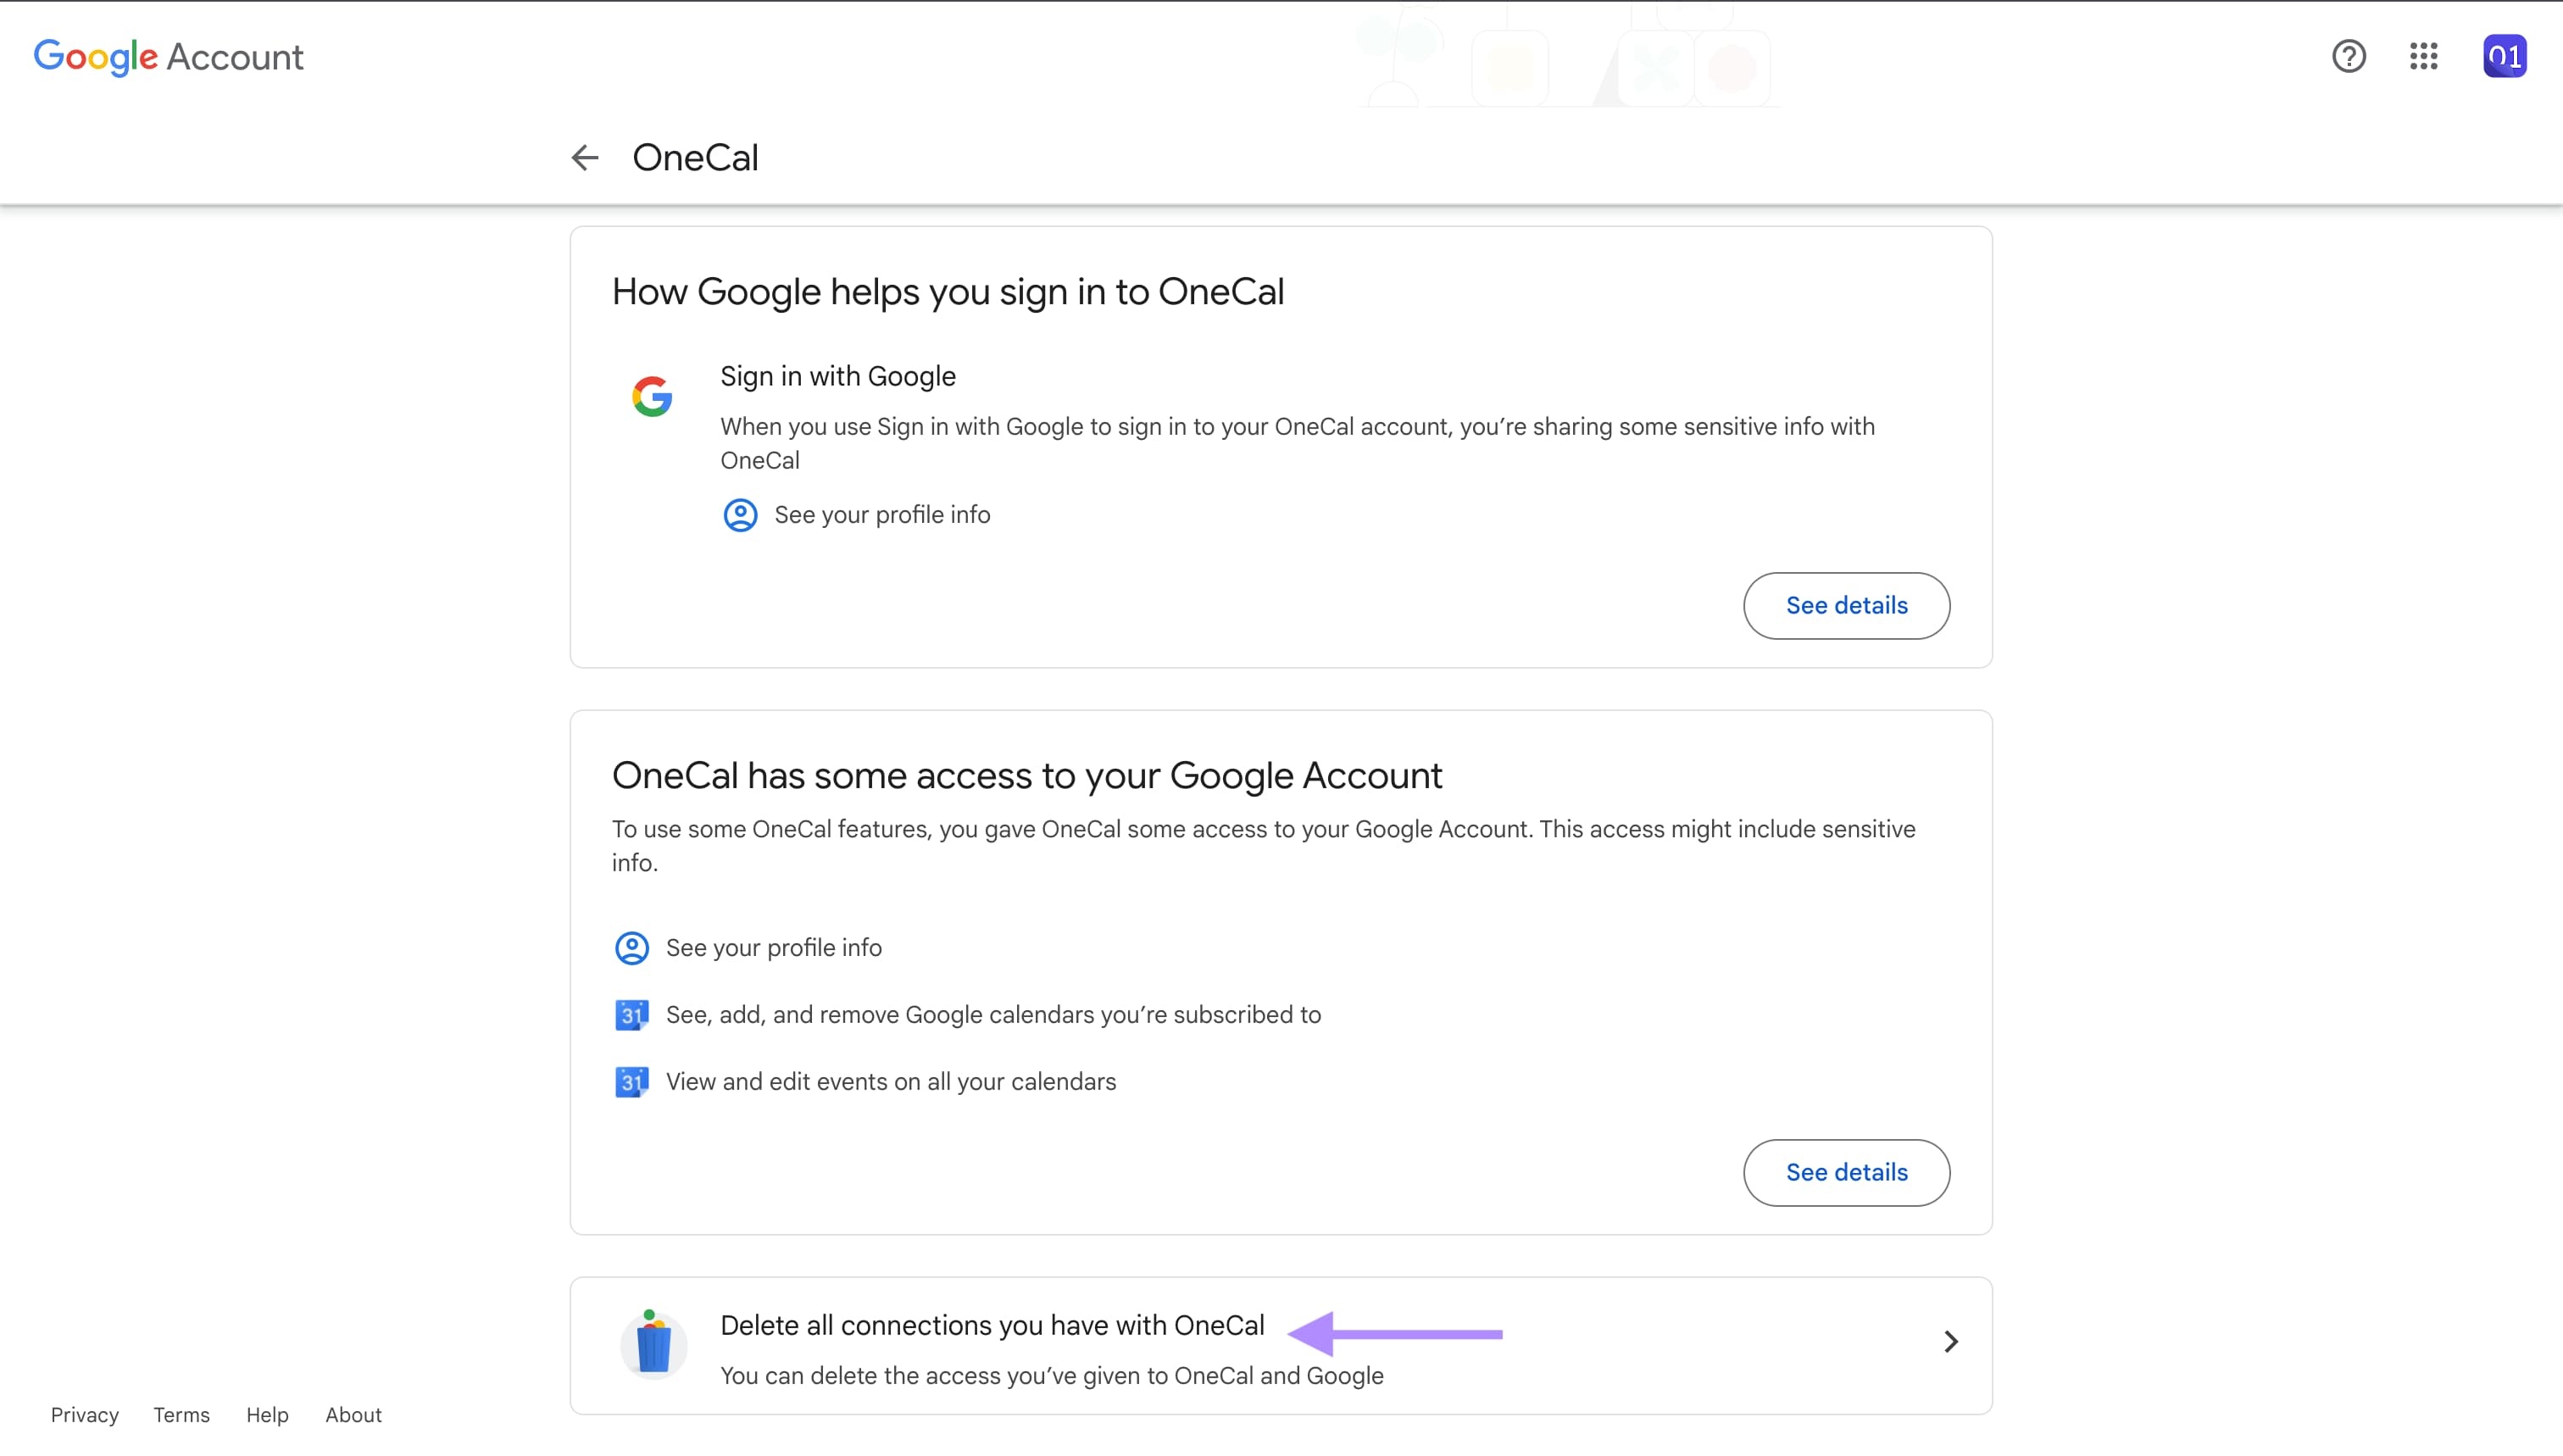 Google Account - Click Delete all connections you have with <AppName>